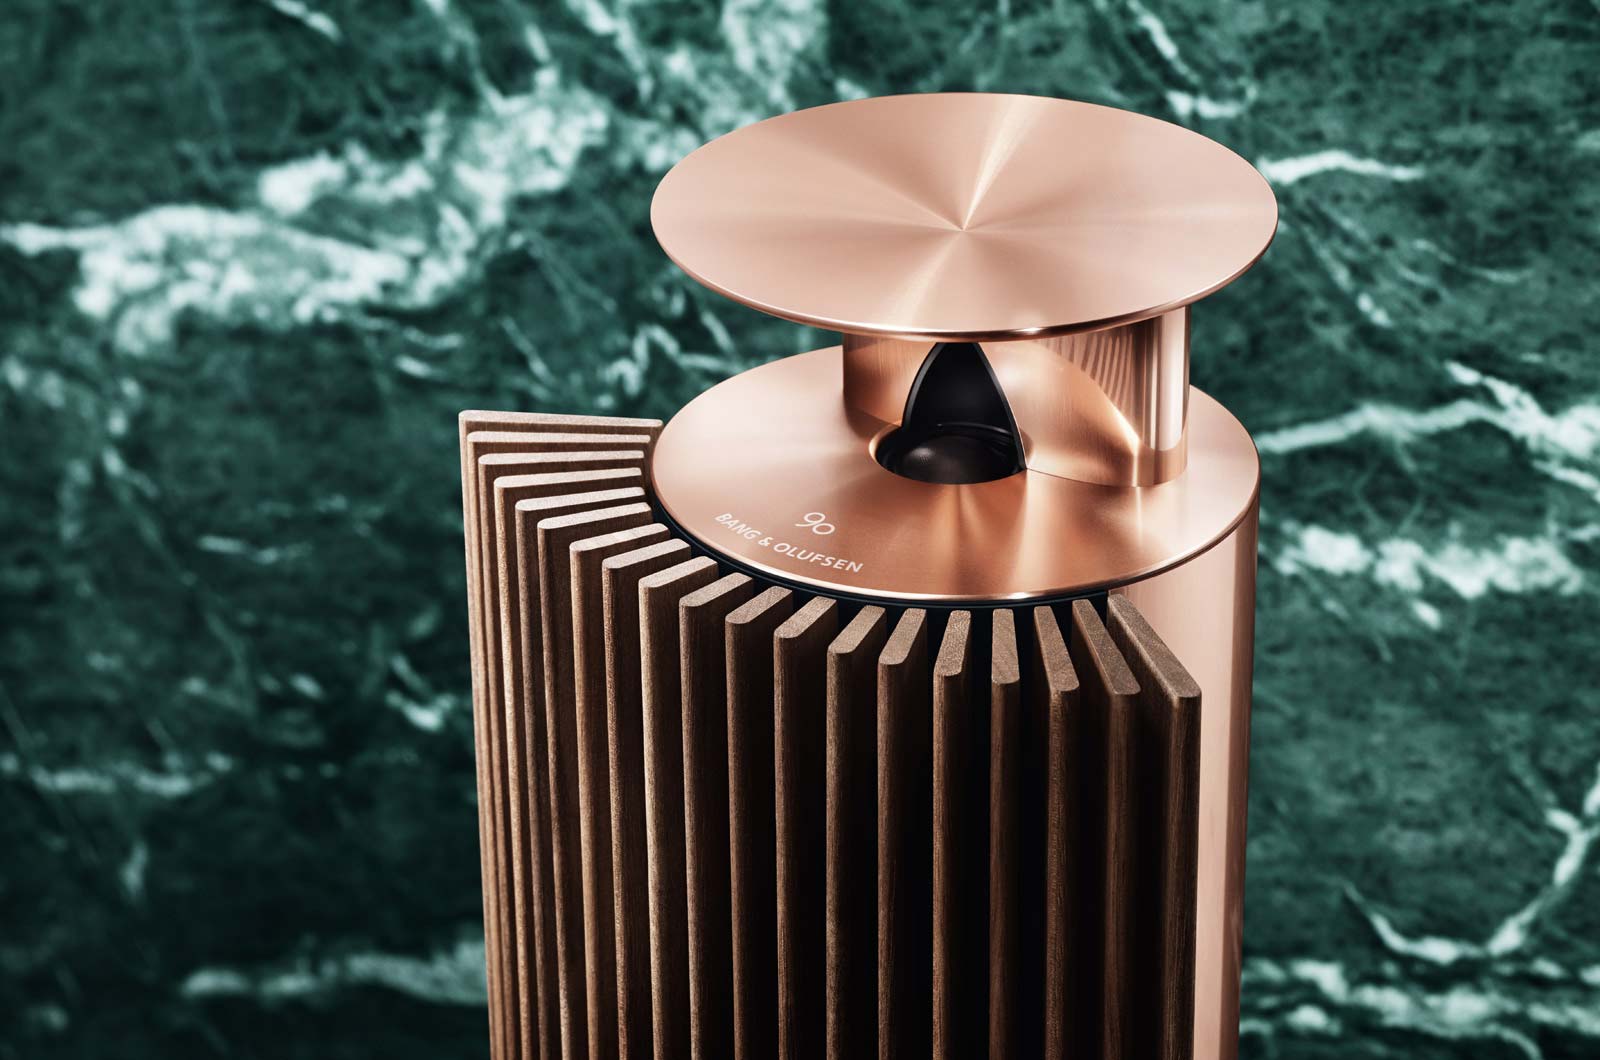 Bang & Olufsen Celebrates 90th Anniversary With the Love Affair Collection